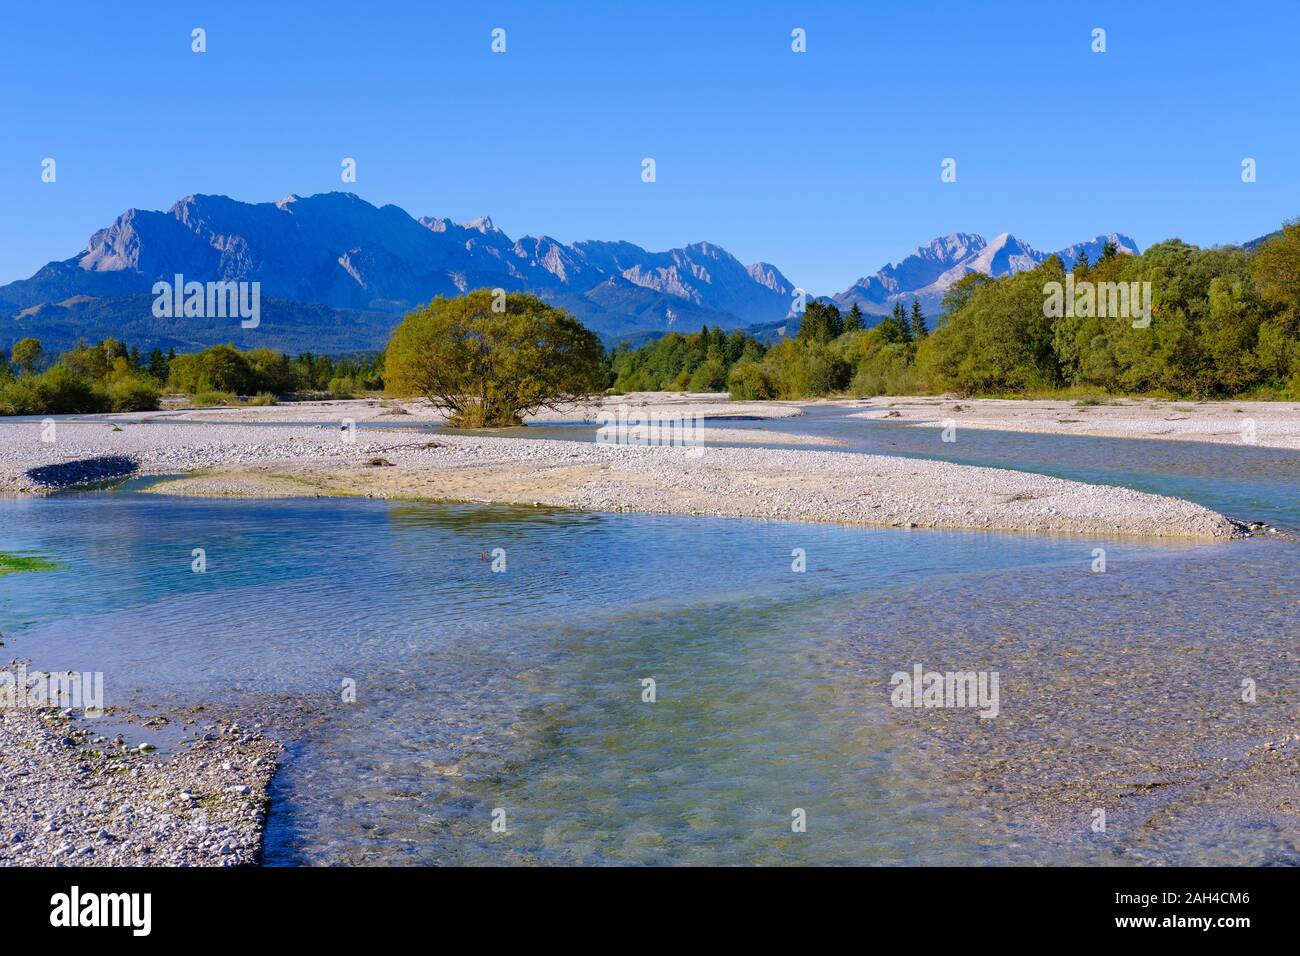 Germany, Bavaria, Wallgau, Scenic view of Isar river with Wetterstein Mountains looming in background Stock Photo